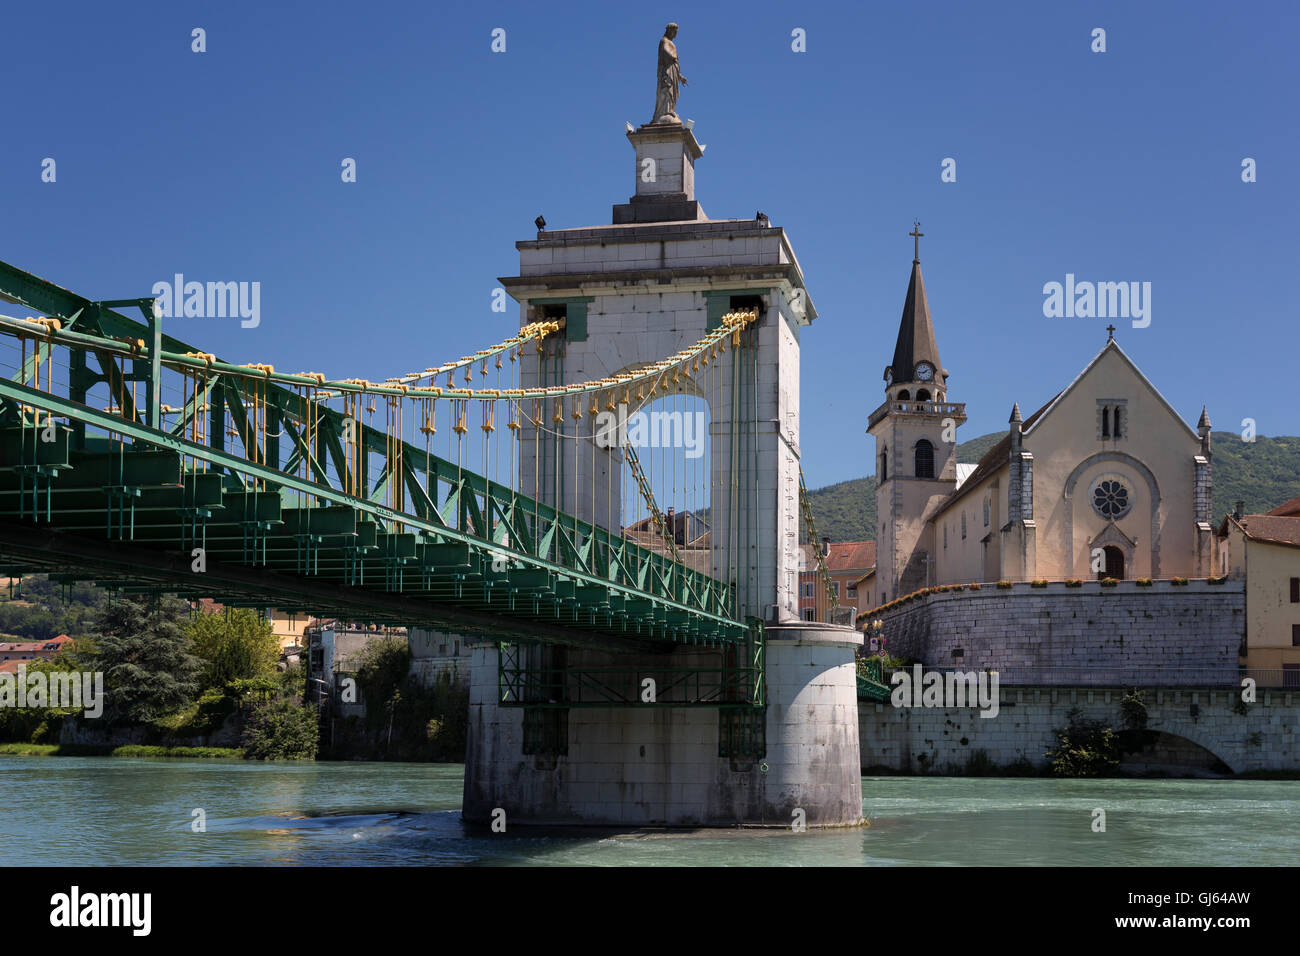 Suspended bridge above the river with church in the background under blue sky Stock Photo